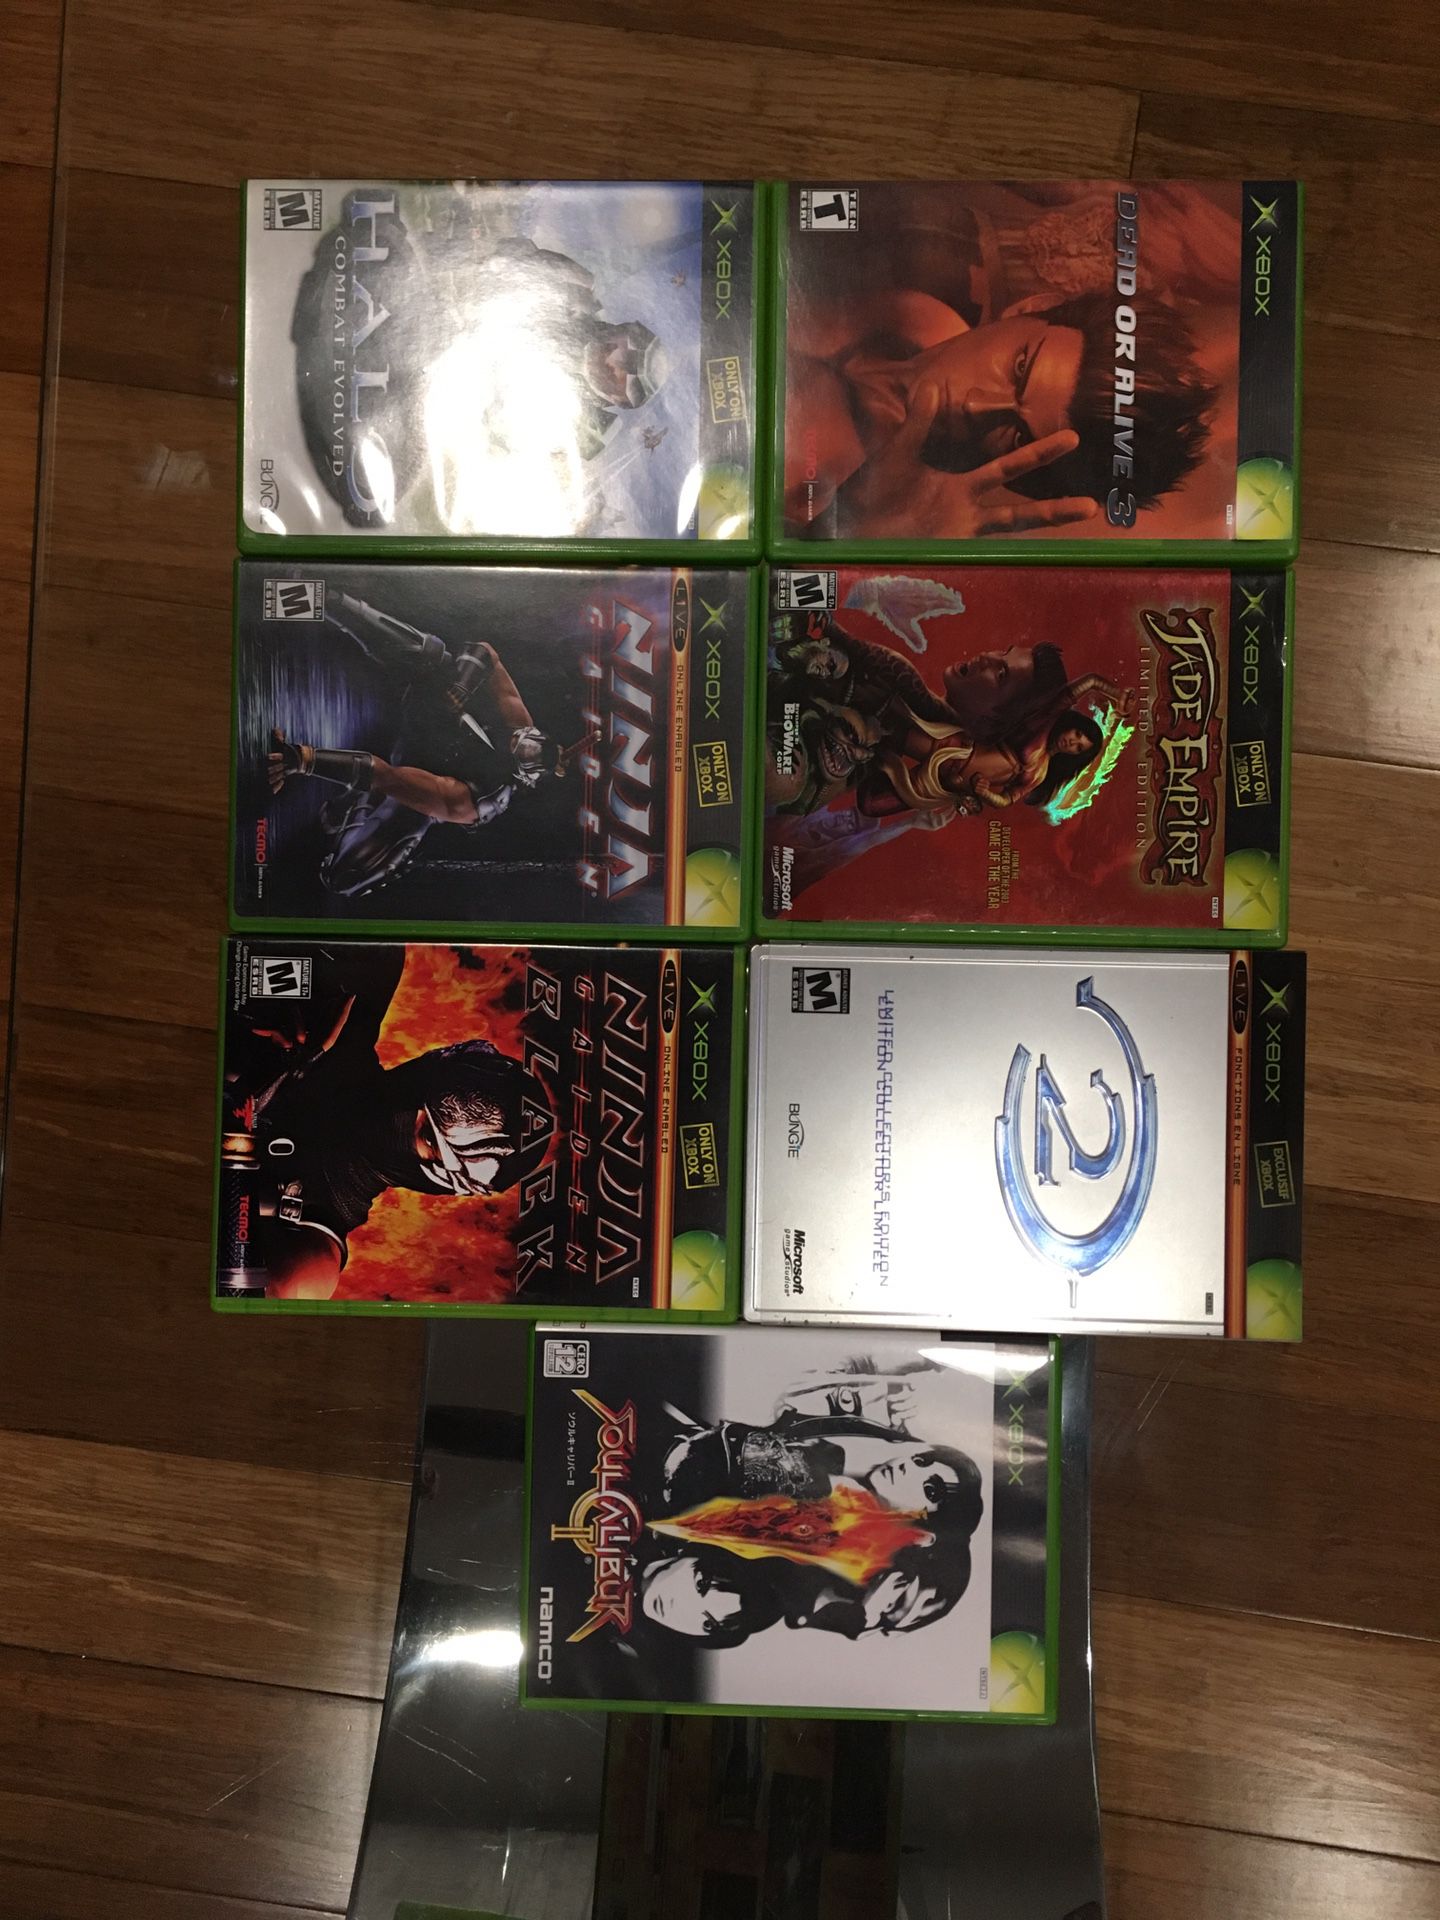 9 X-box games. $10 for the 9 games!